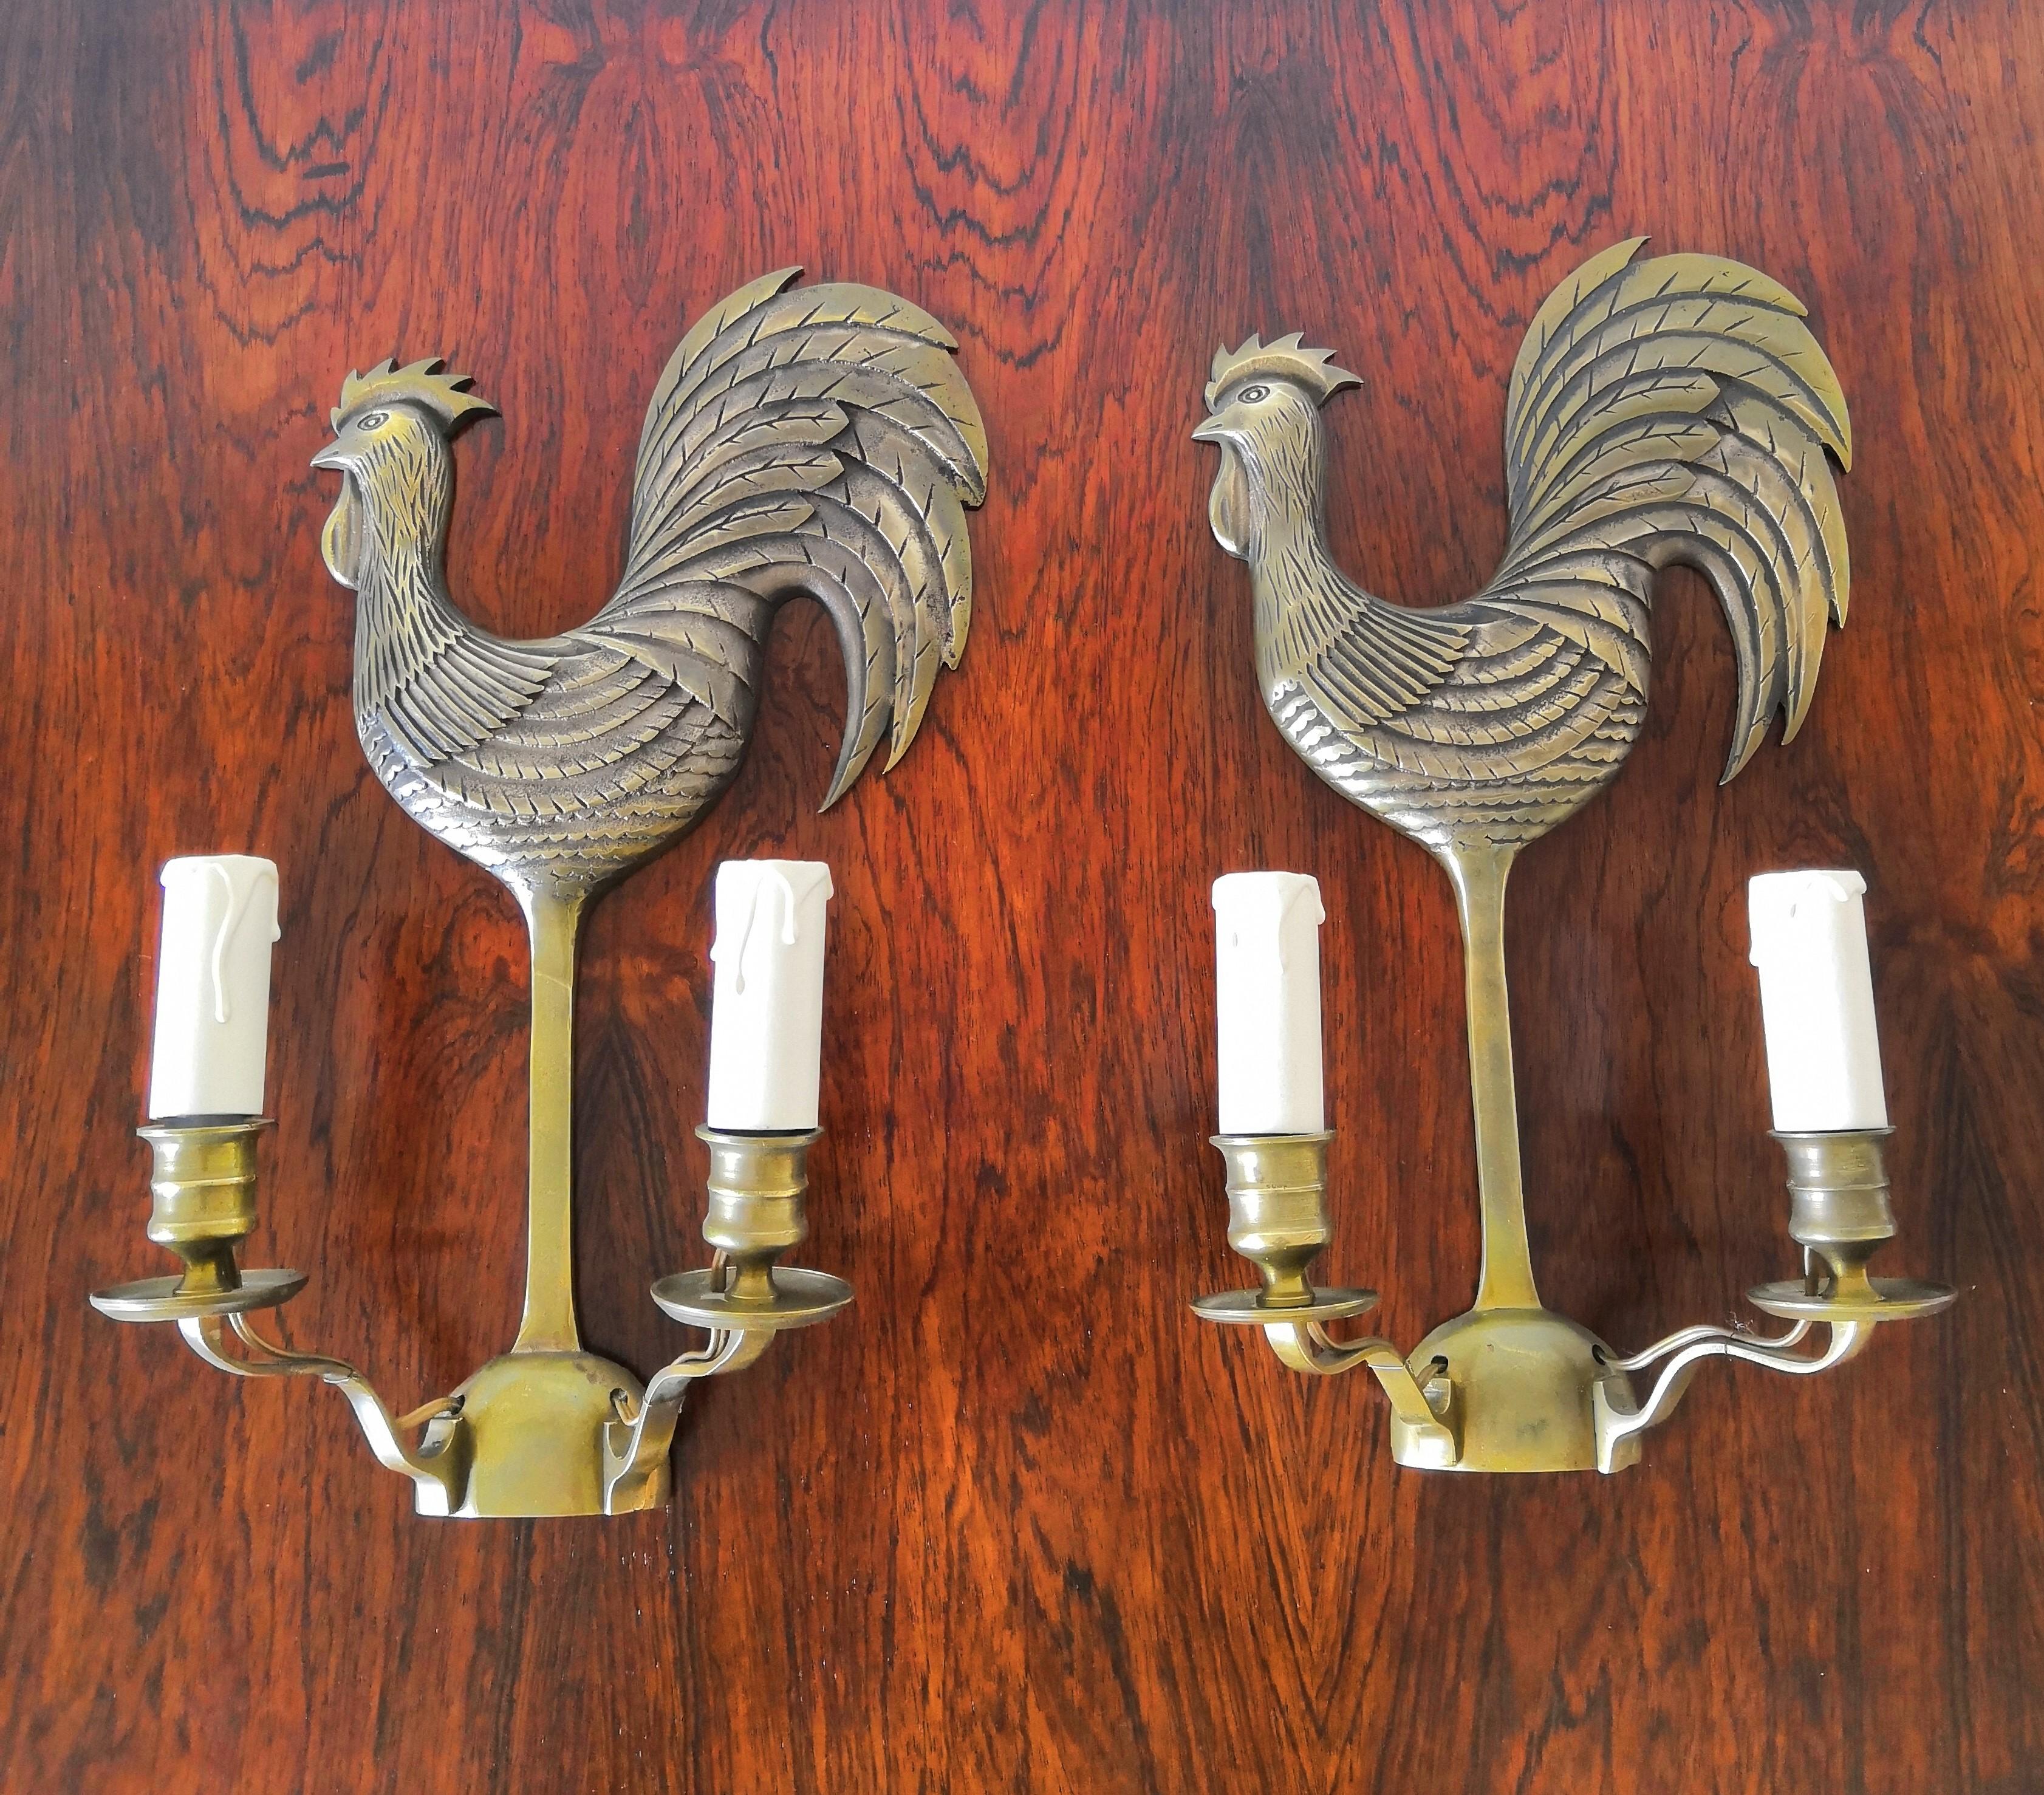 Patinated bronze
European sockets
these sconces will ship from France
price does not include shipping nor possible customs duties related charges.